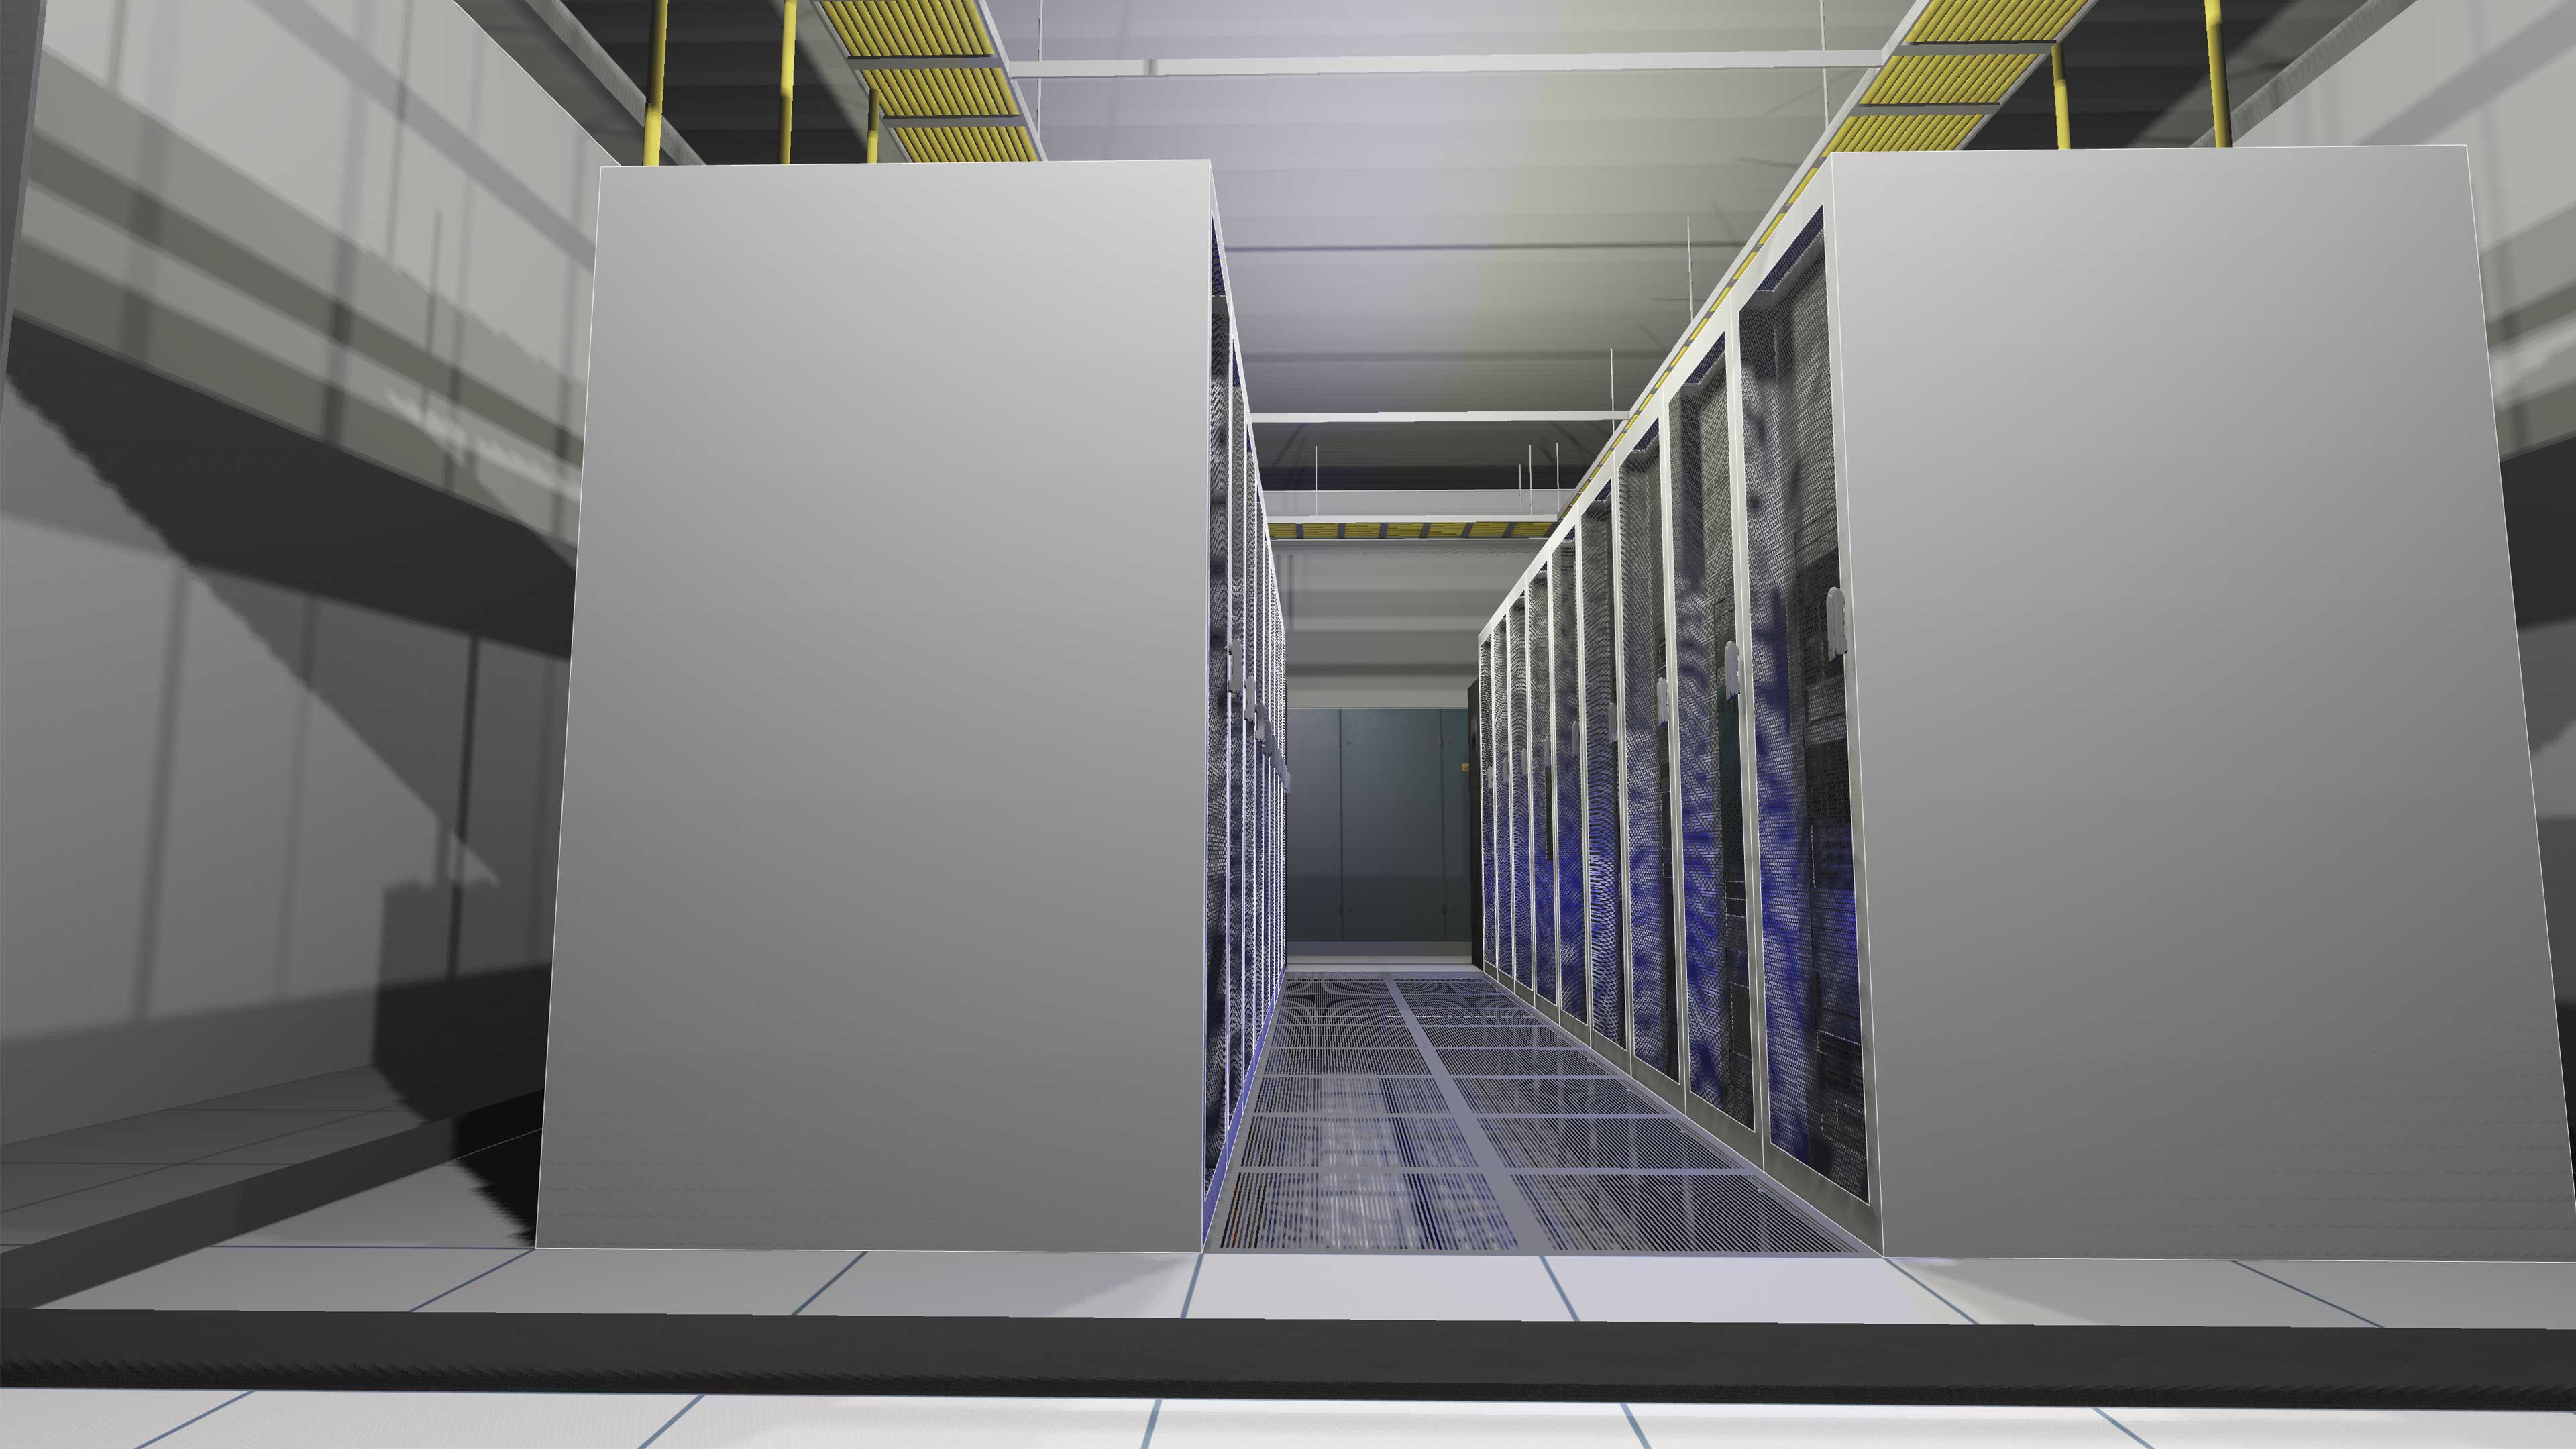 DataCenter Digital Twin in the enhanced view